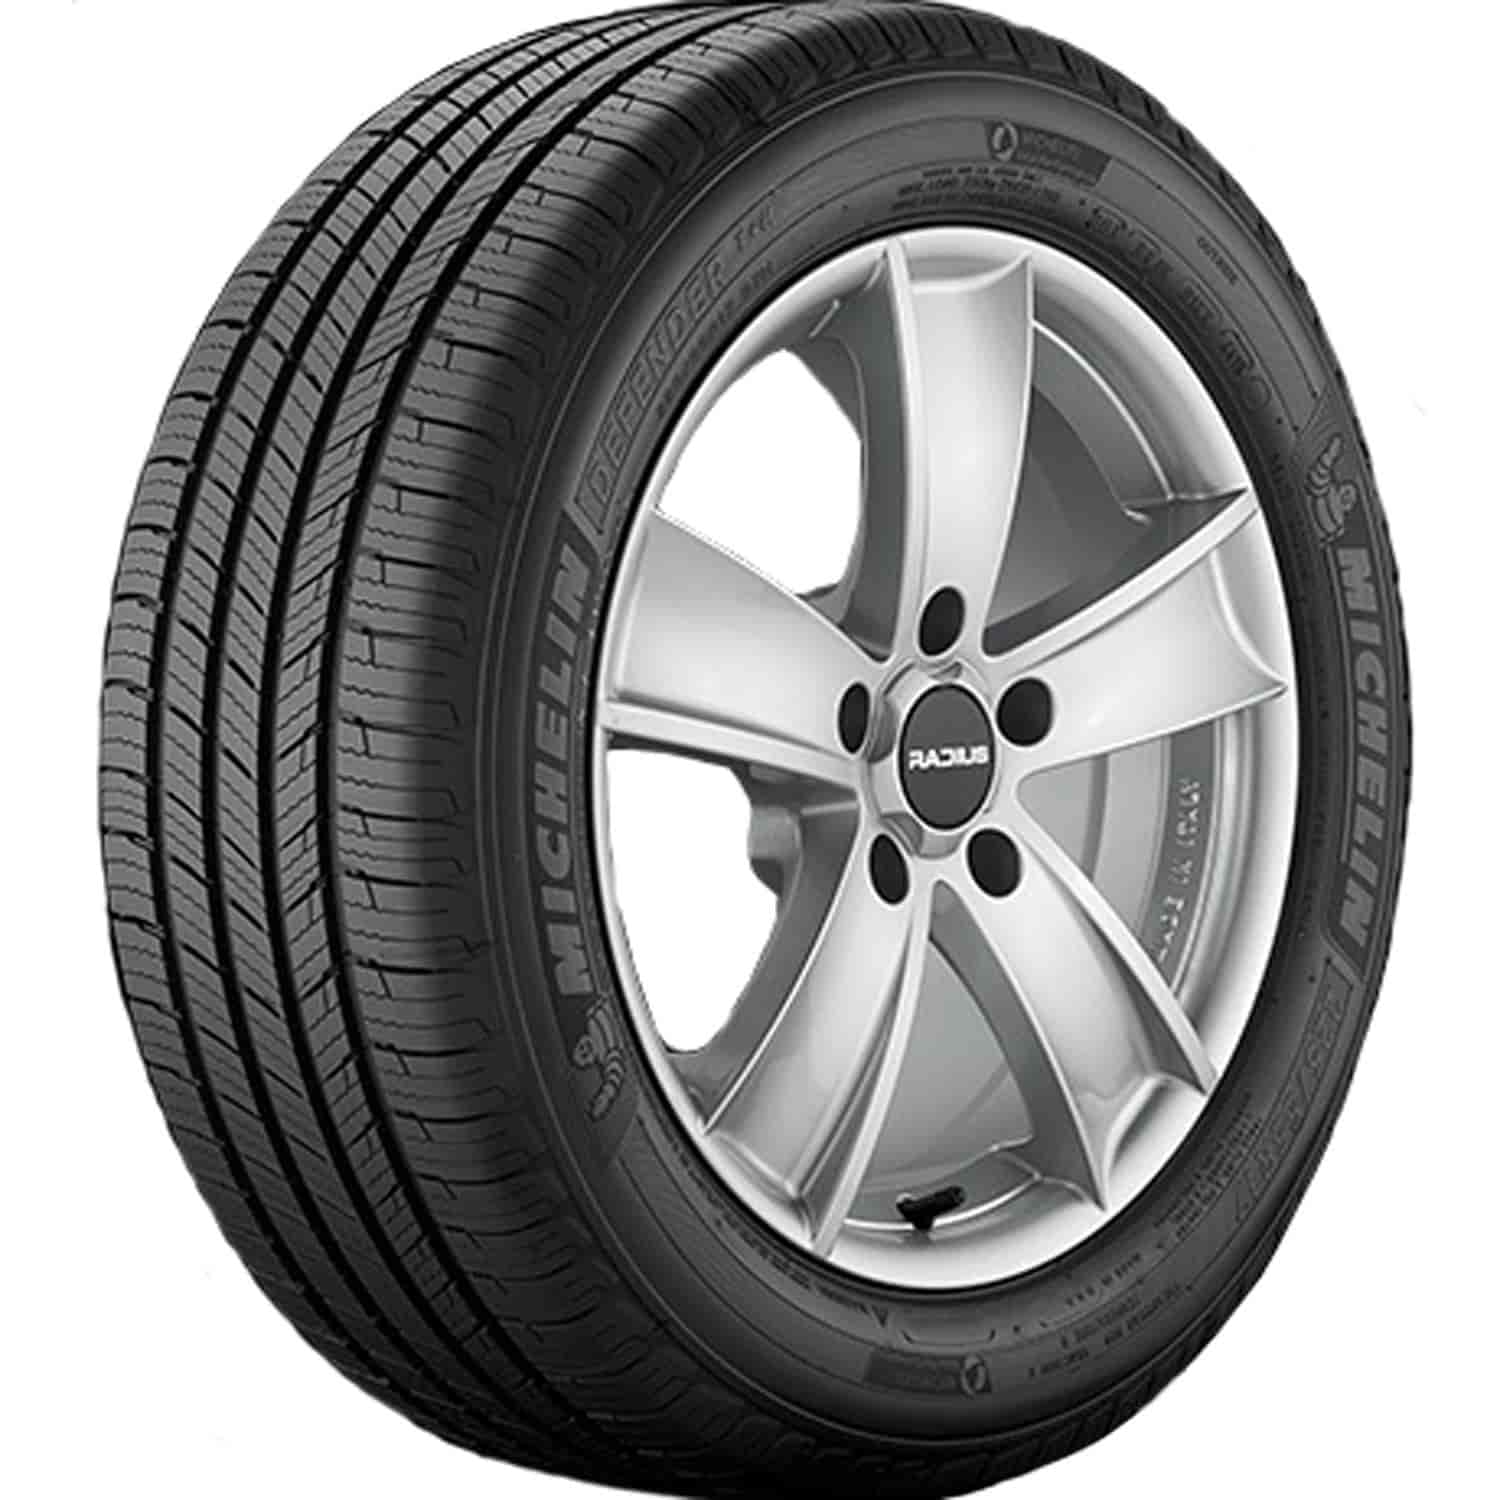 Defender T+H Tire Size:195/60R15